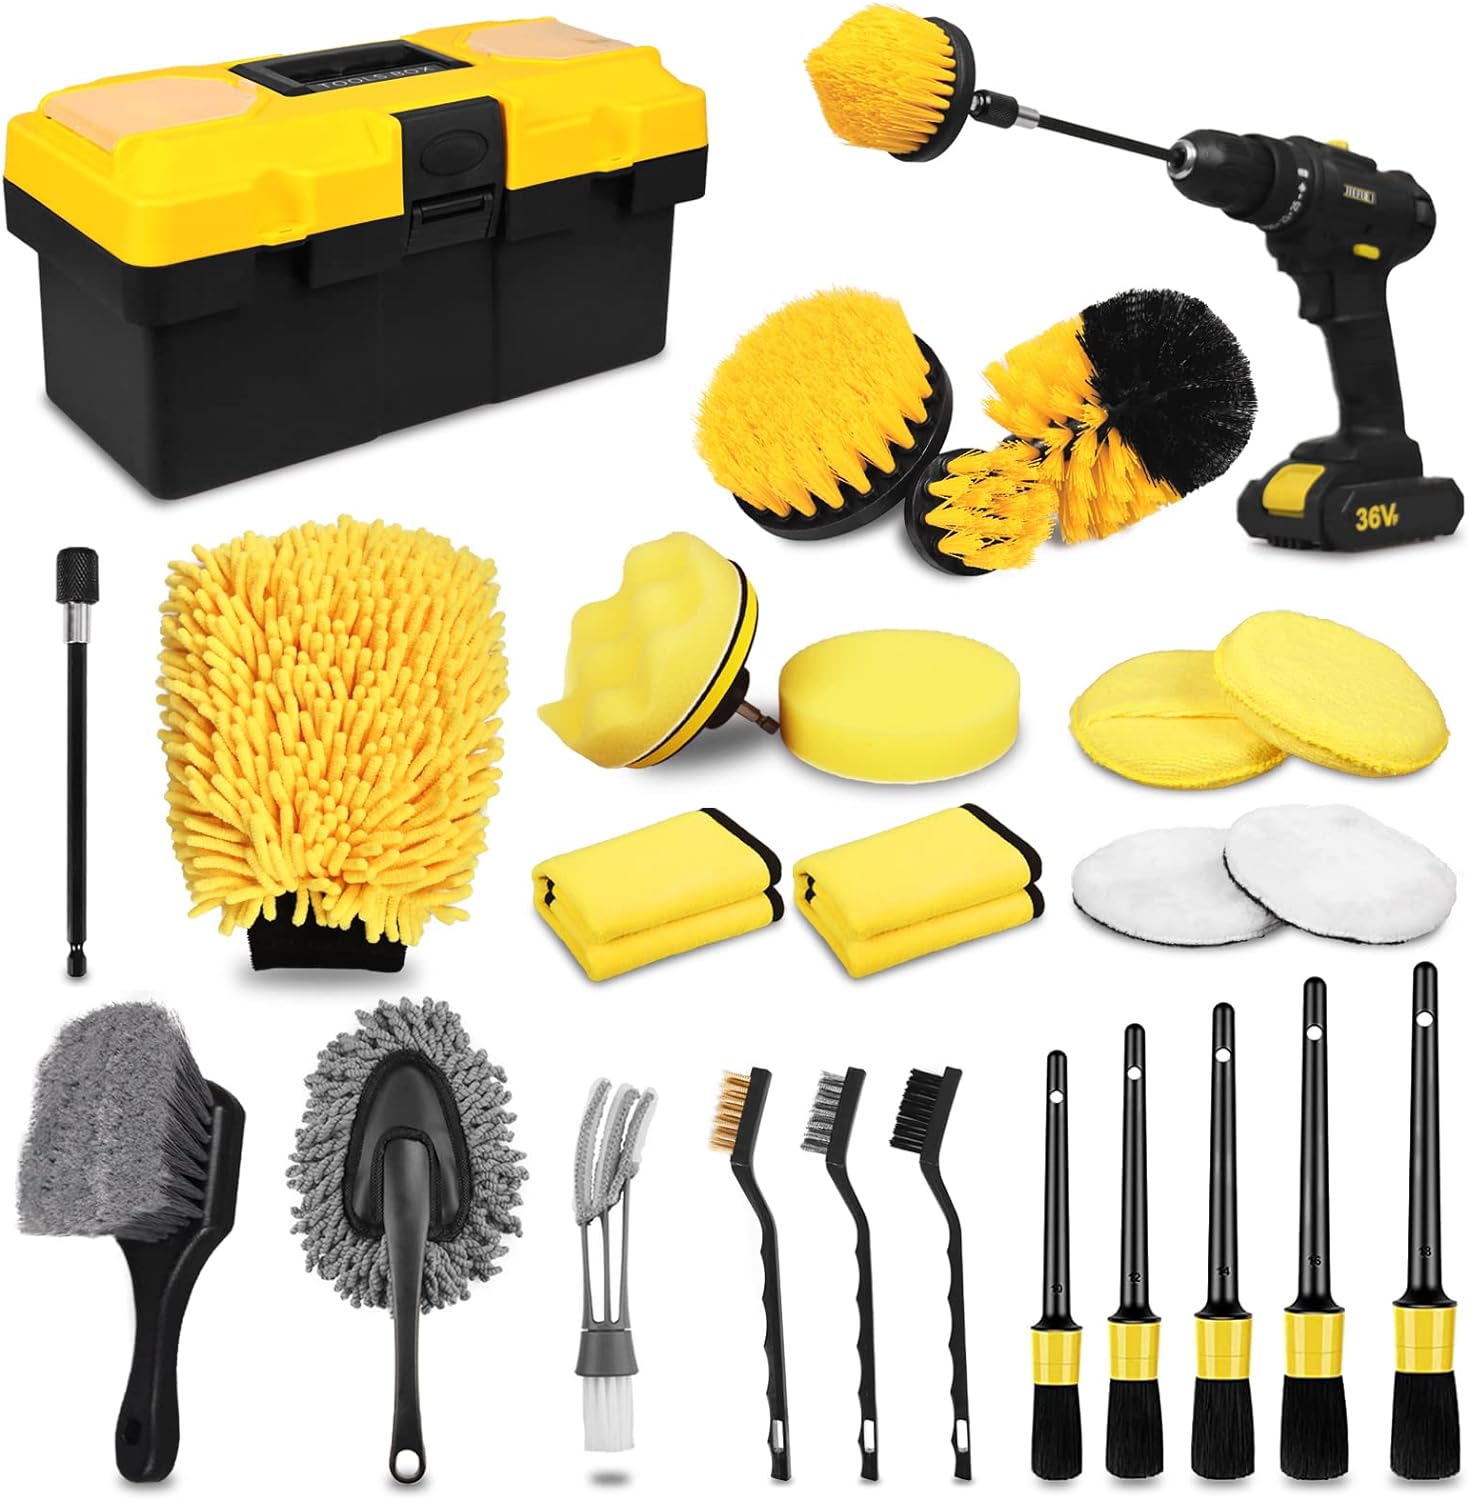 Complete 27-Piece Car Detailing Kit with Brush and Drill Attachments